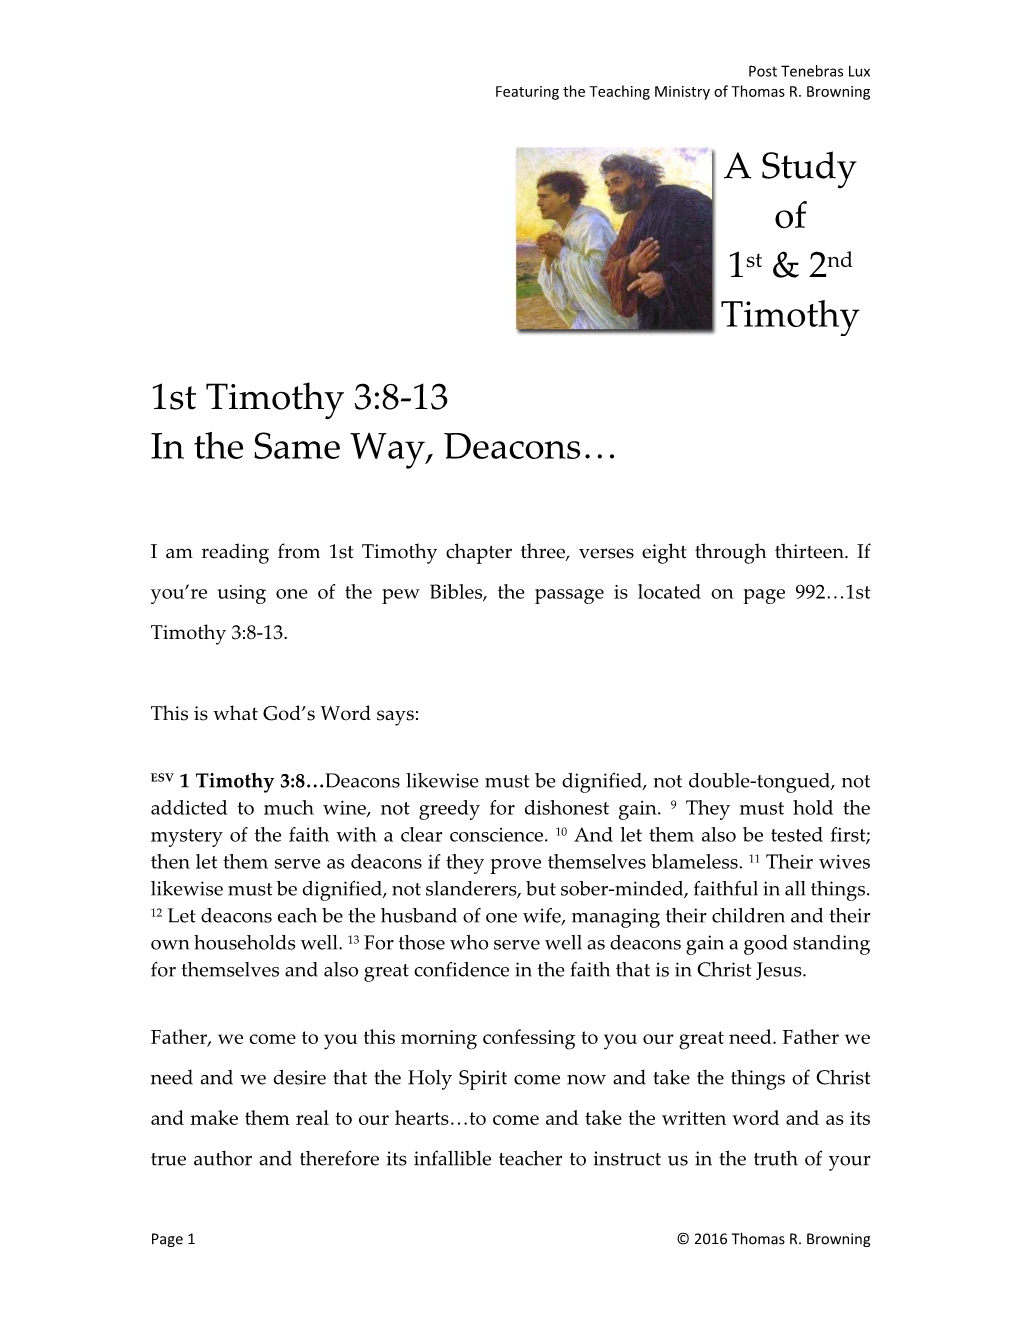 1St Timothy 3:8-13 in the Same Way, Deacons…